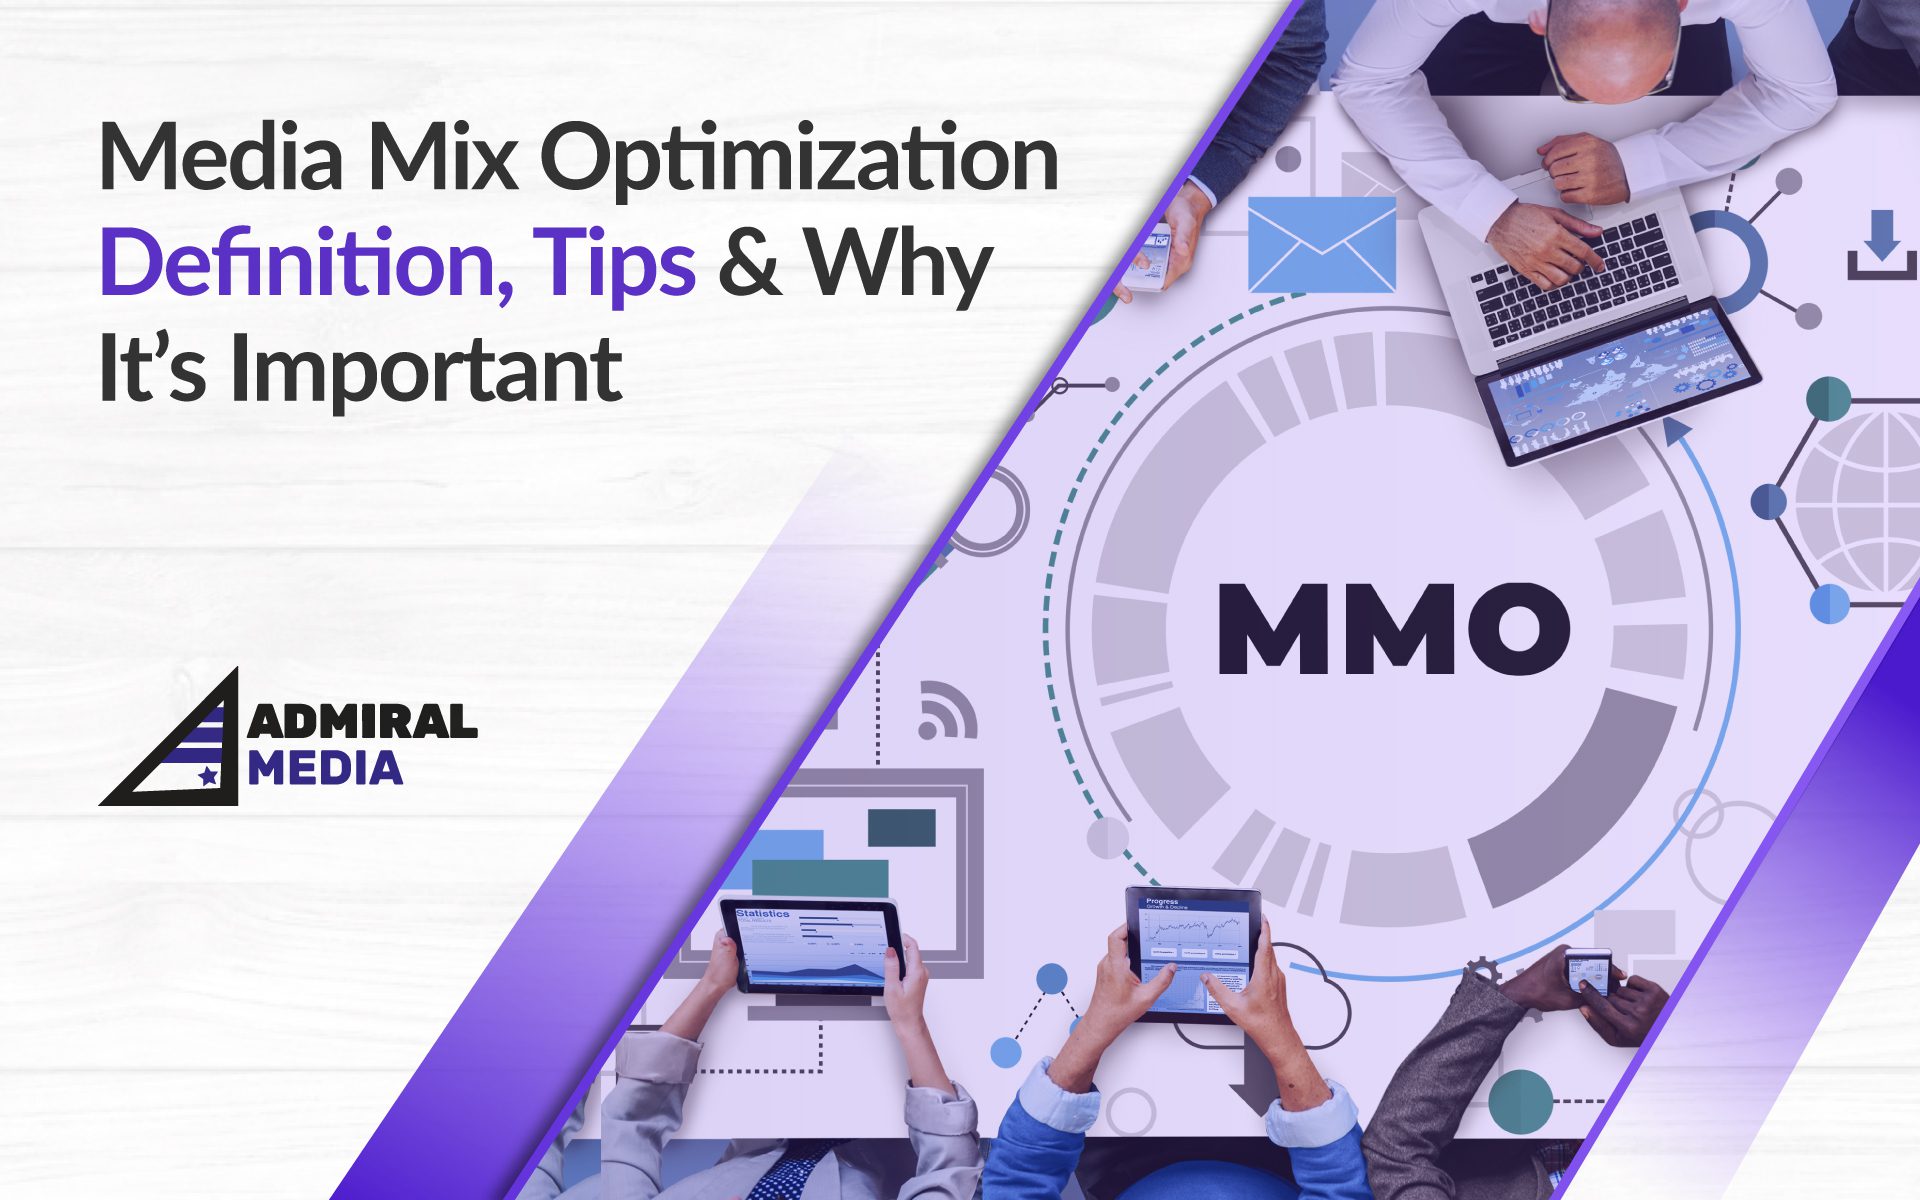 Media Mix Optimization Definition and Tips